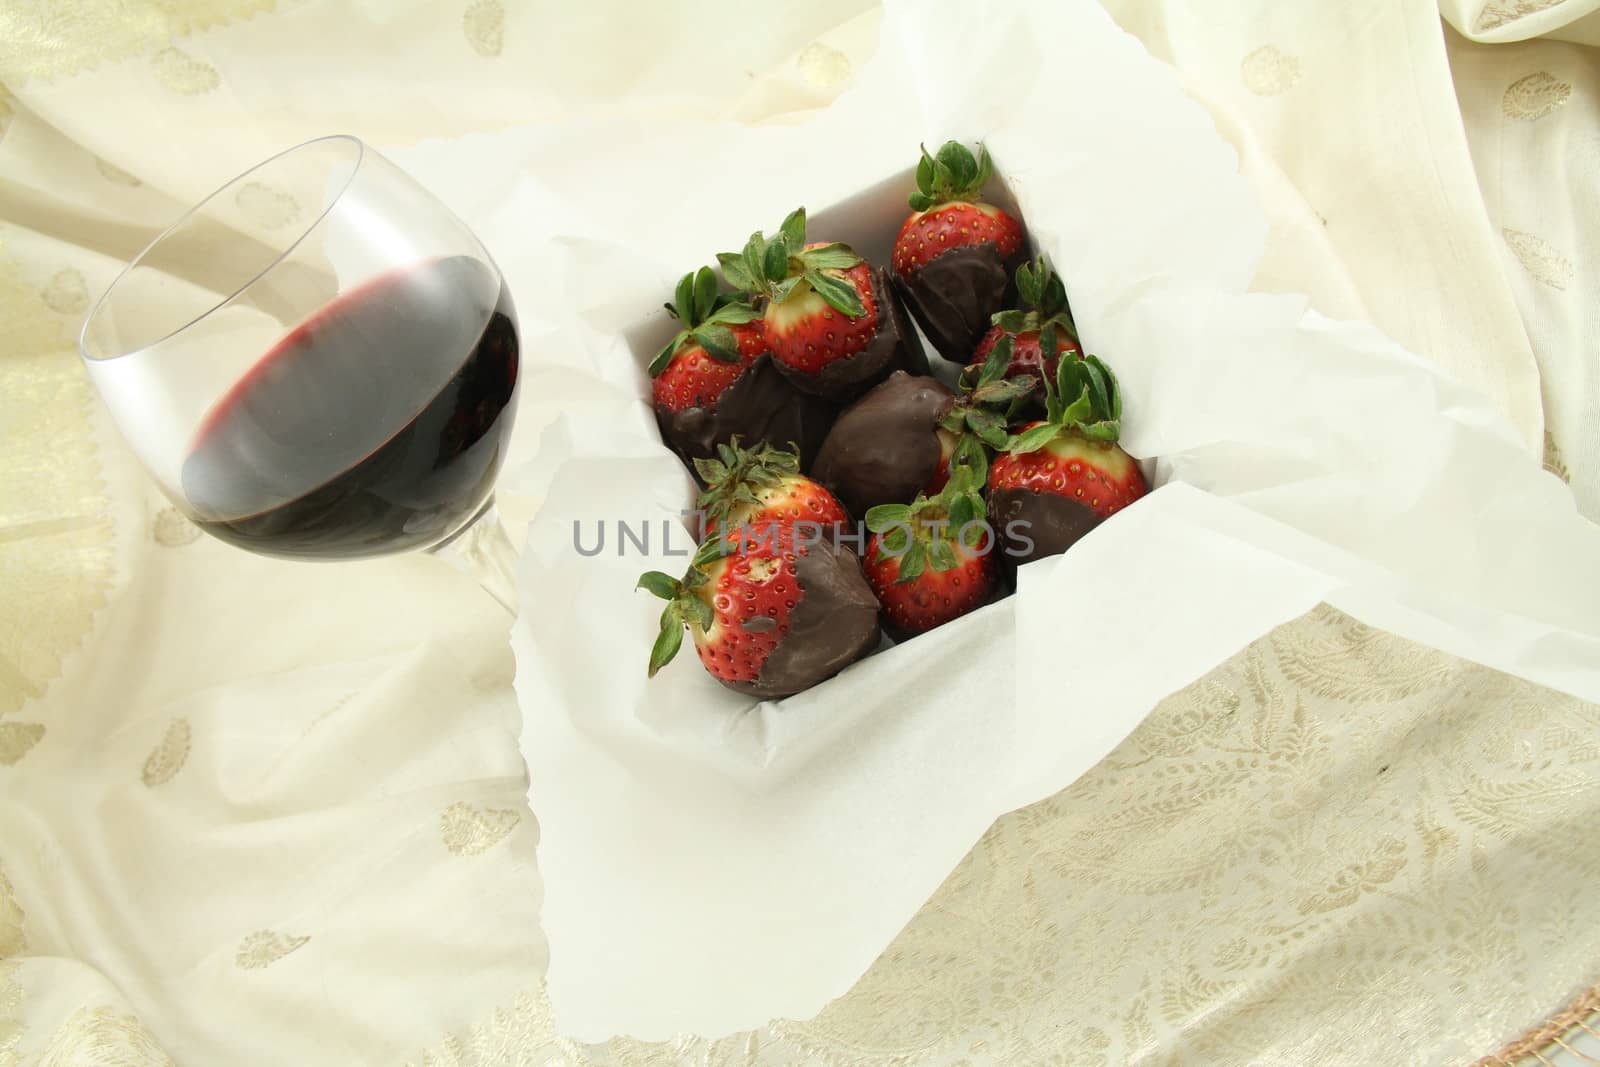 Red Wine and Chocolate Strawberries by bellafotosolo